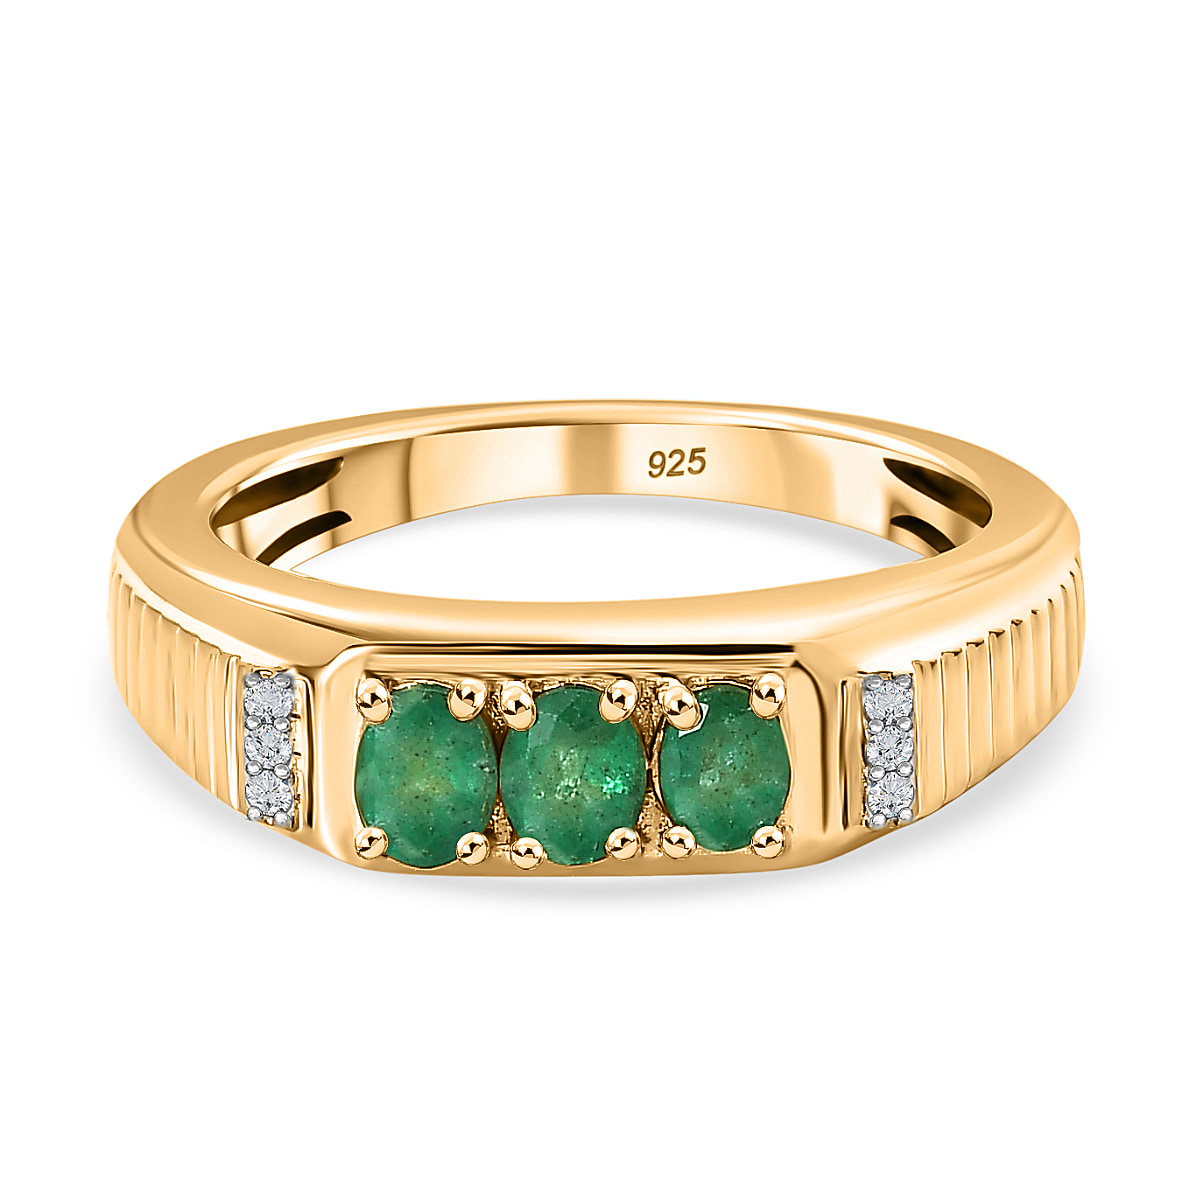 Premium Emerald & Natural Zircon Ring in 18K Yellow Gold Vermeil Plated Sterling Silver